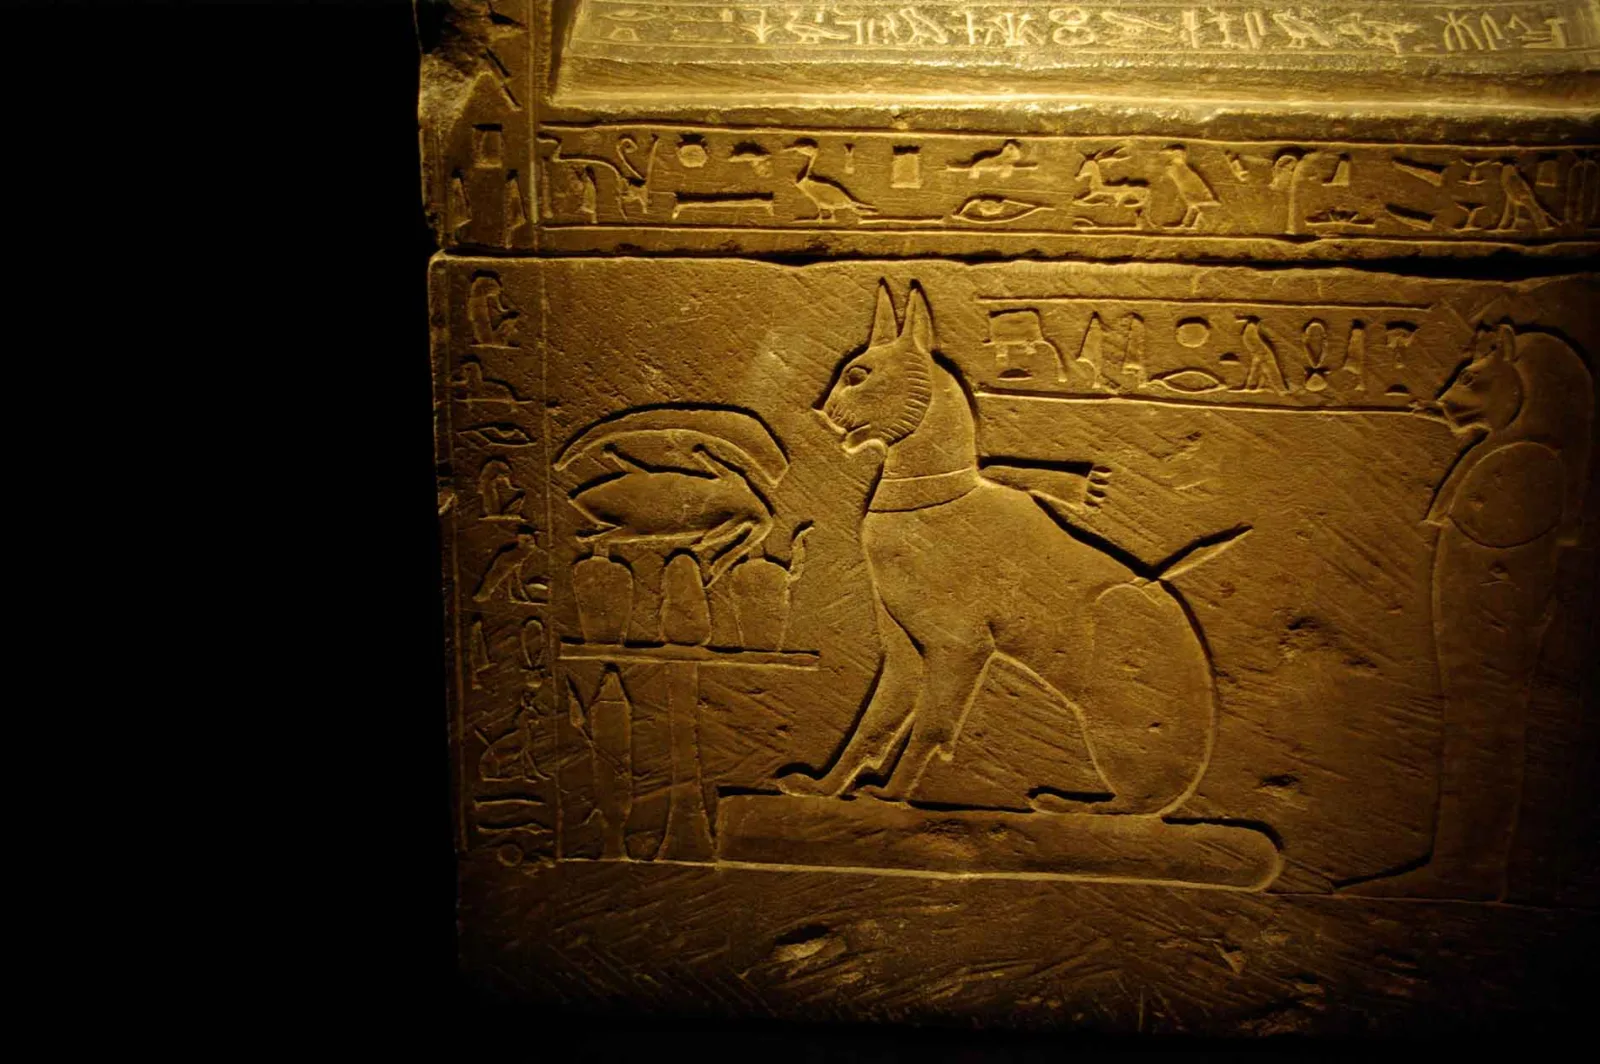 Bas-relief carving of a seated feline figure with pointed ears and a scarf on. It sits before an offering table. Hieroglyphs frame the scene.